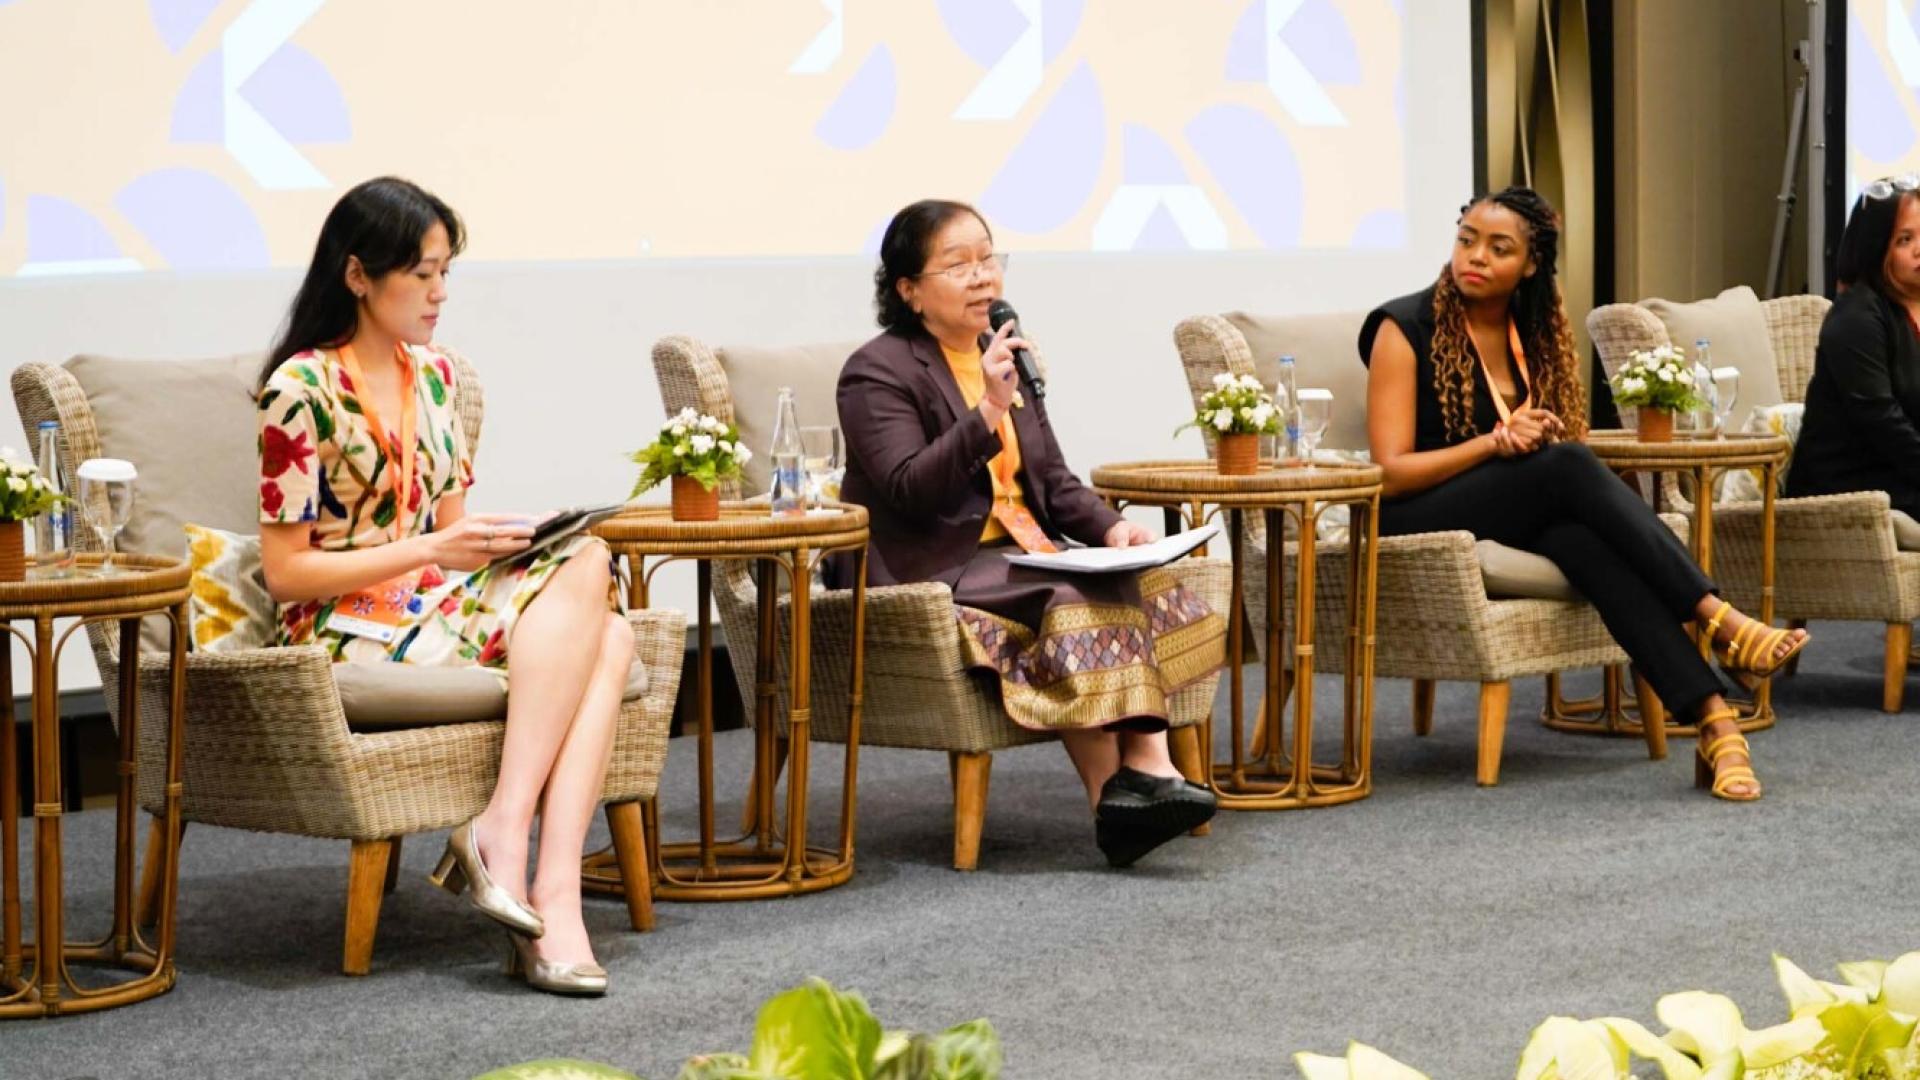 Three women seated on a panel. The woman in the centre speaks into a microphone